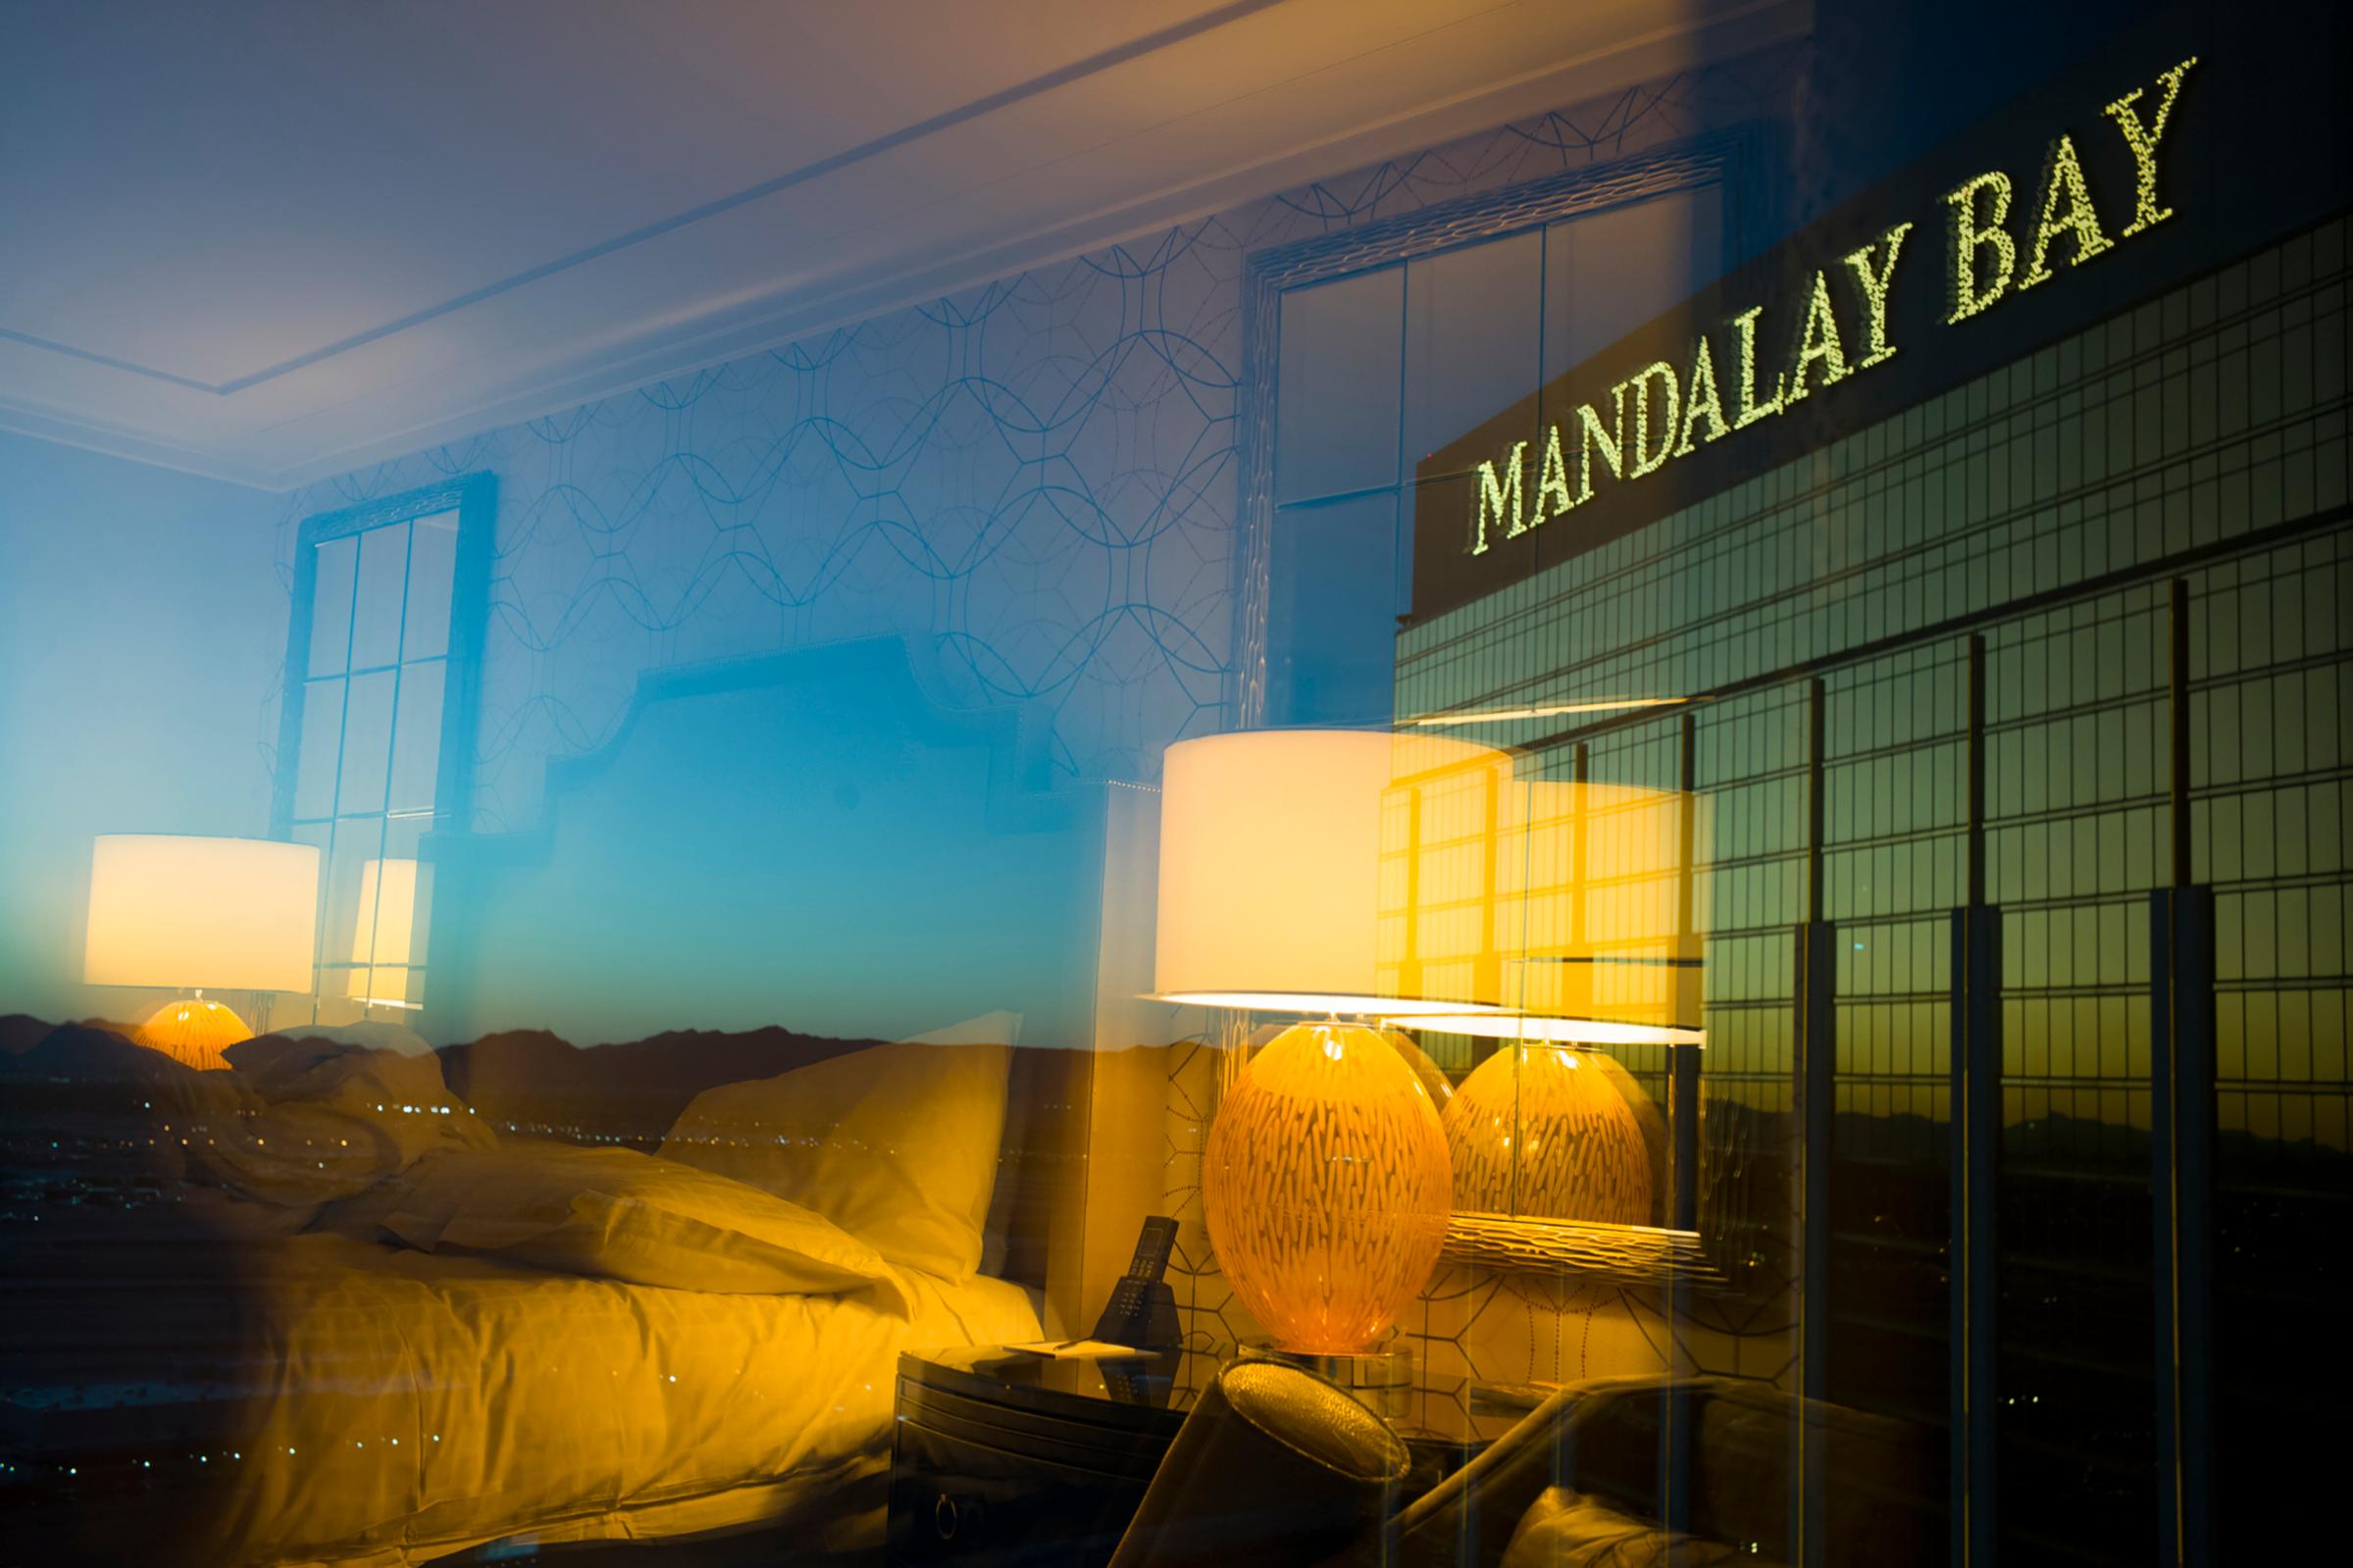 Photographer's hotel room is reflected on to the window that he is shooting through, on the other side of the glass is the Mandalay Bay Hotel sign, Oct. 3, 2017.